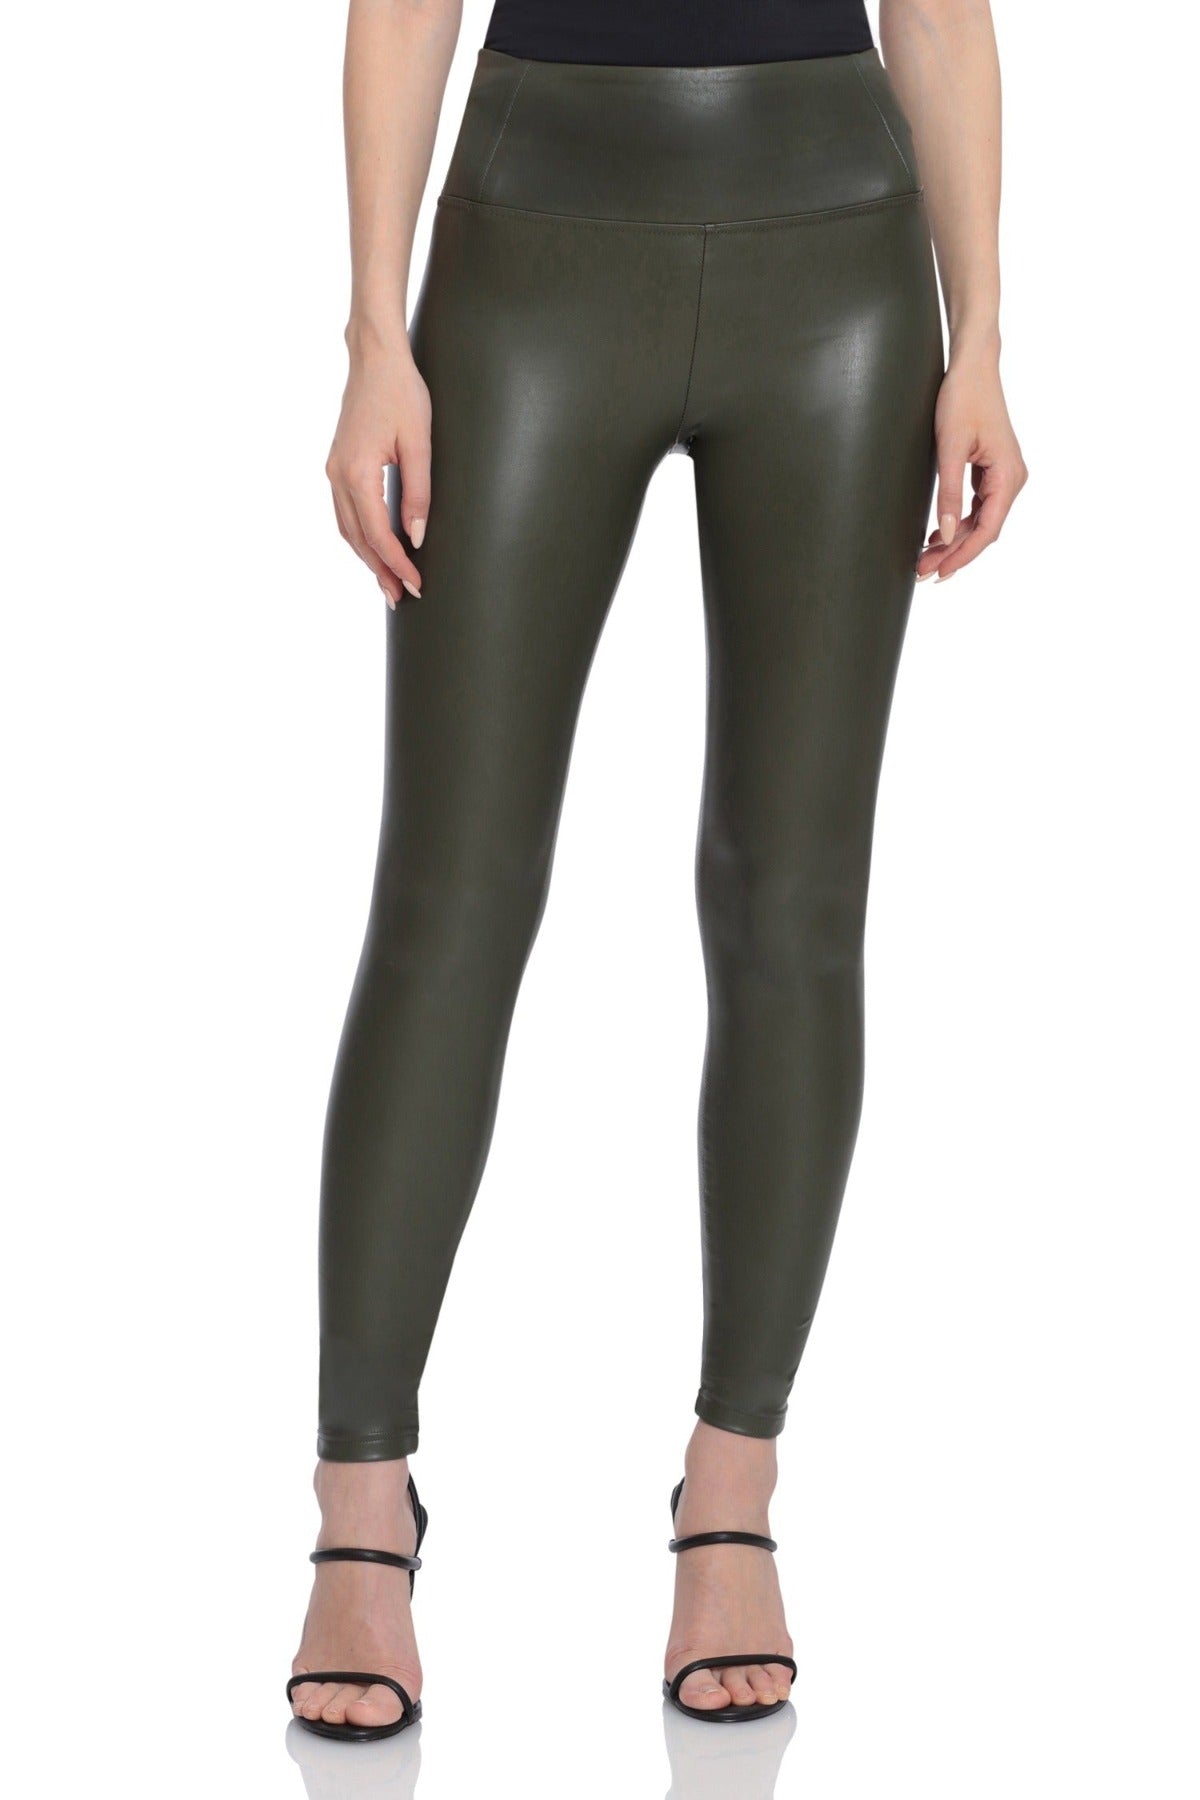 Premium Faux Leather Leggings with Exposed Front Seams | Only Leggings  Superstore